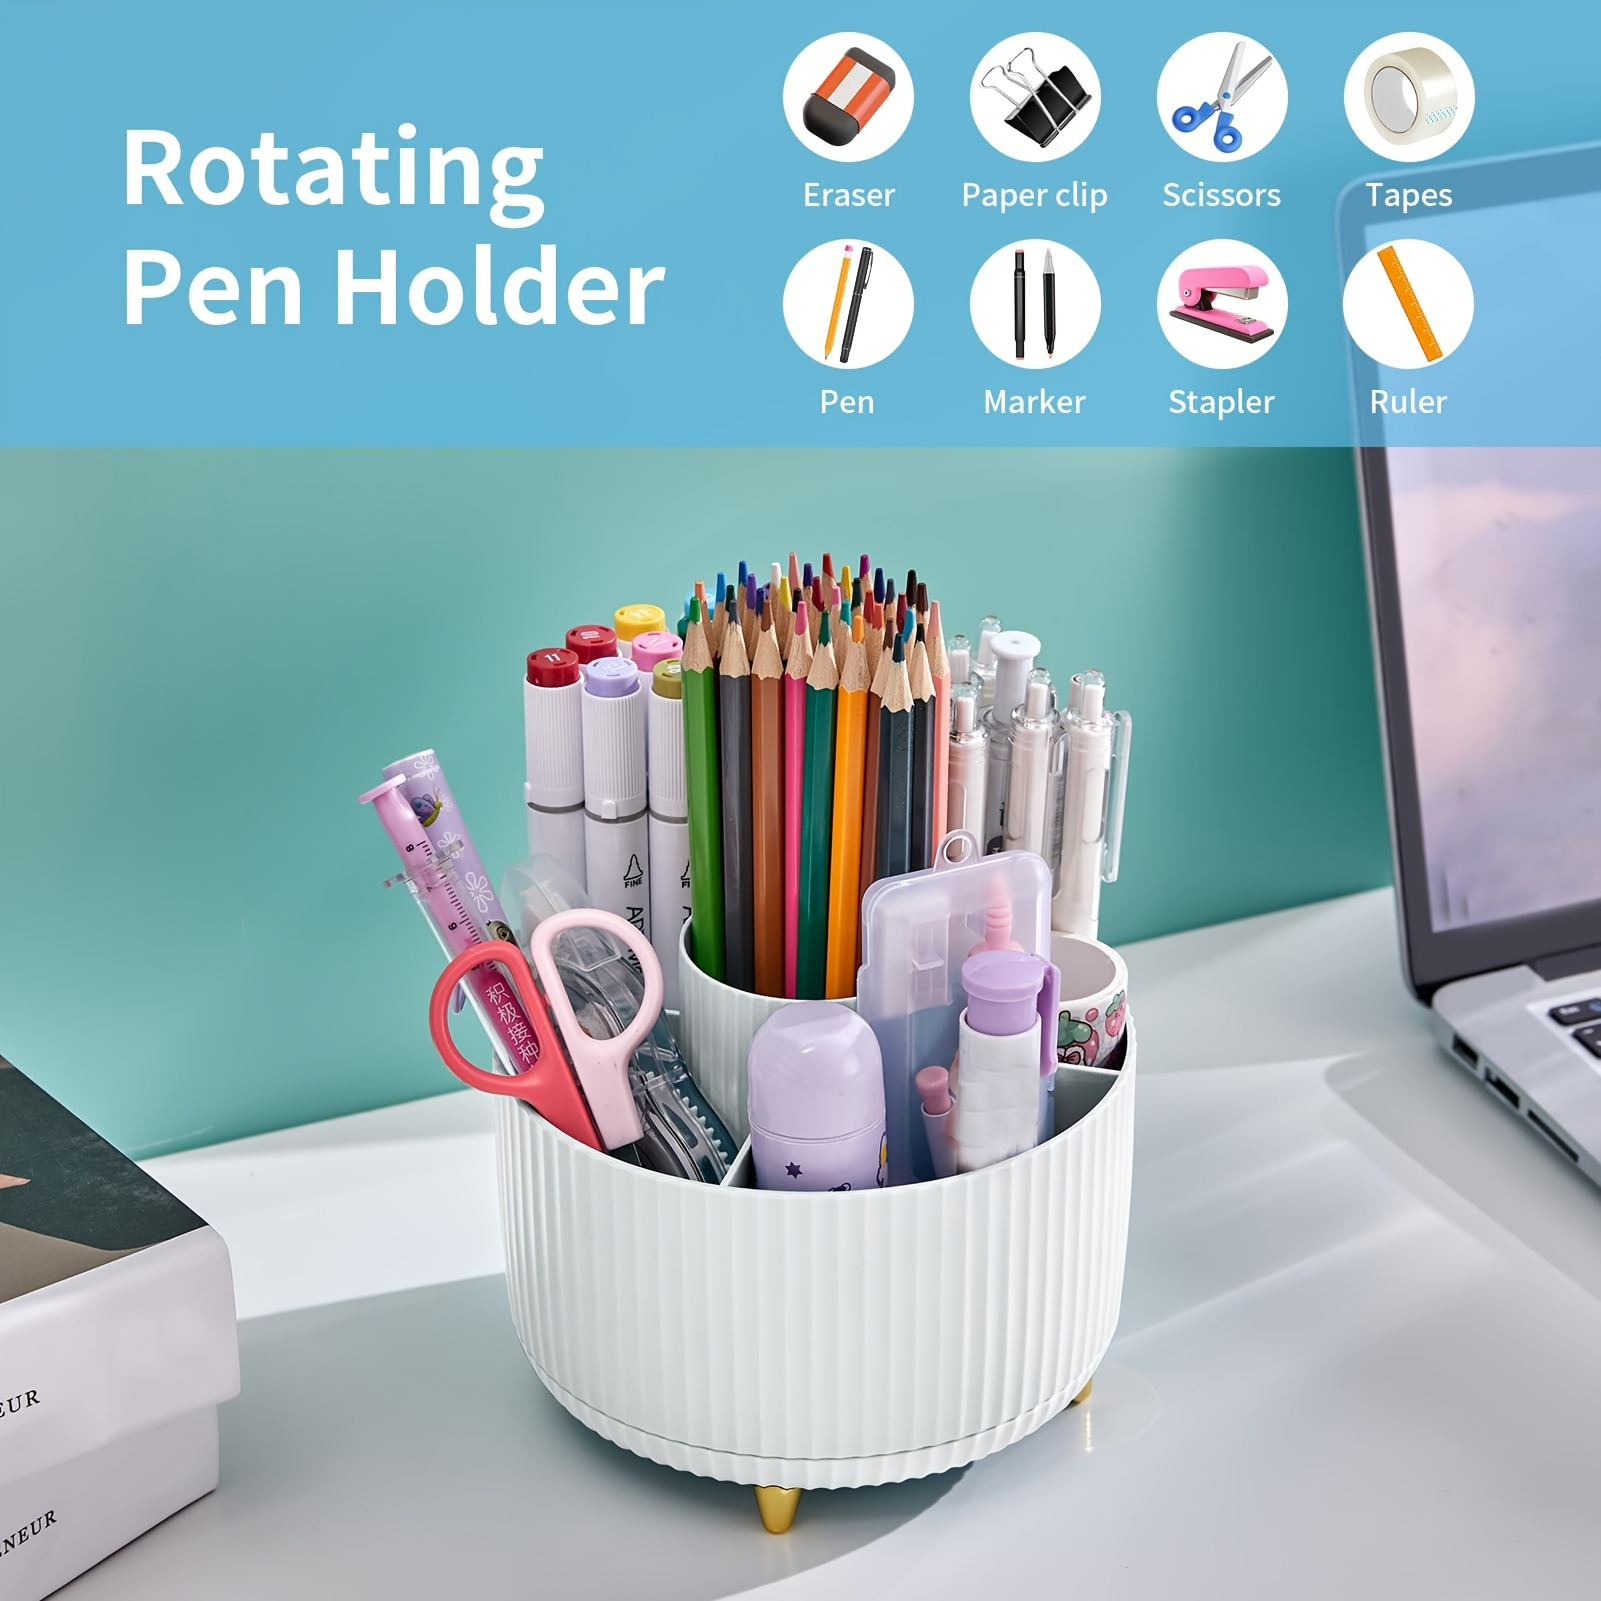 

Marbrasse Desk Organizer, 360-degree Rotating Pen Holder For Desk, Desk Organizers And Accessories With 5 Compartments Pencil Organizer, Art Supply Storage Box Caddy For Office, Home